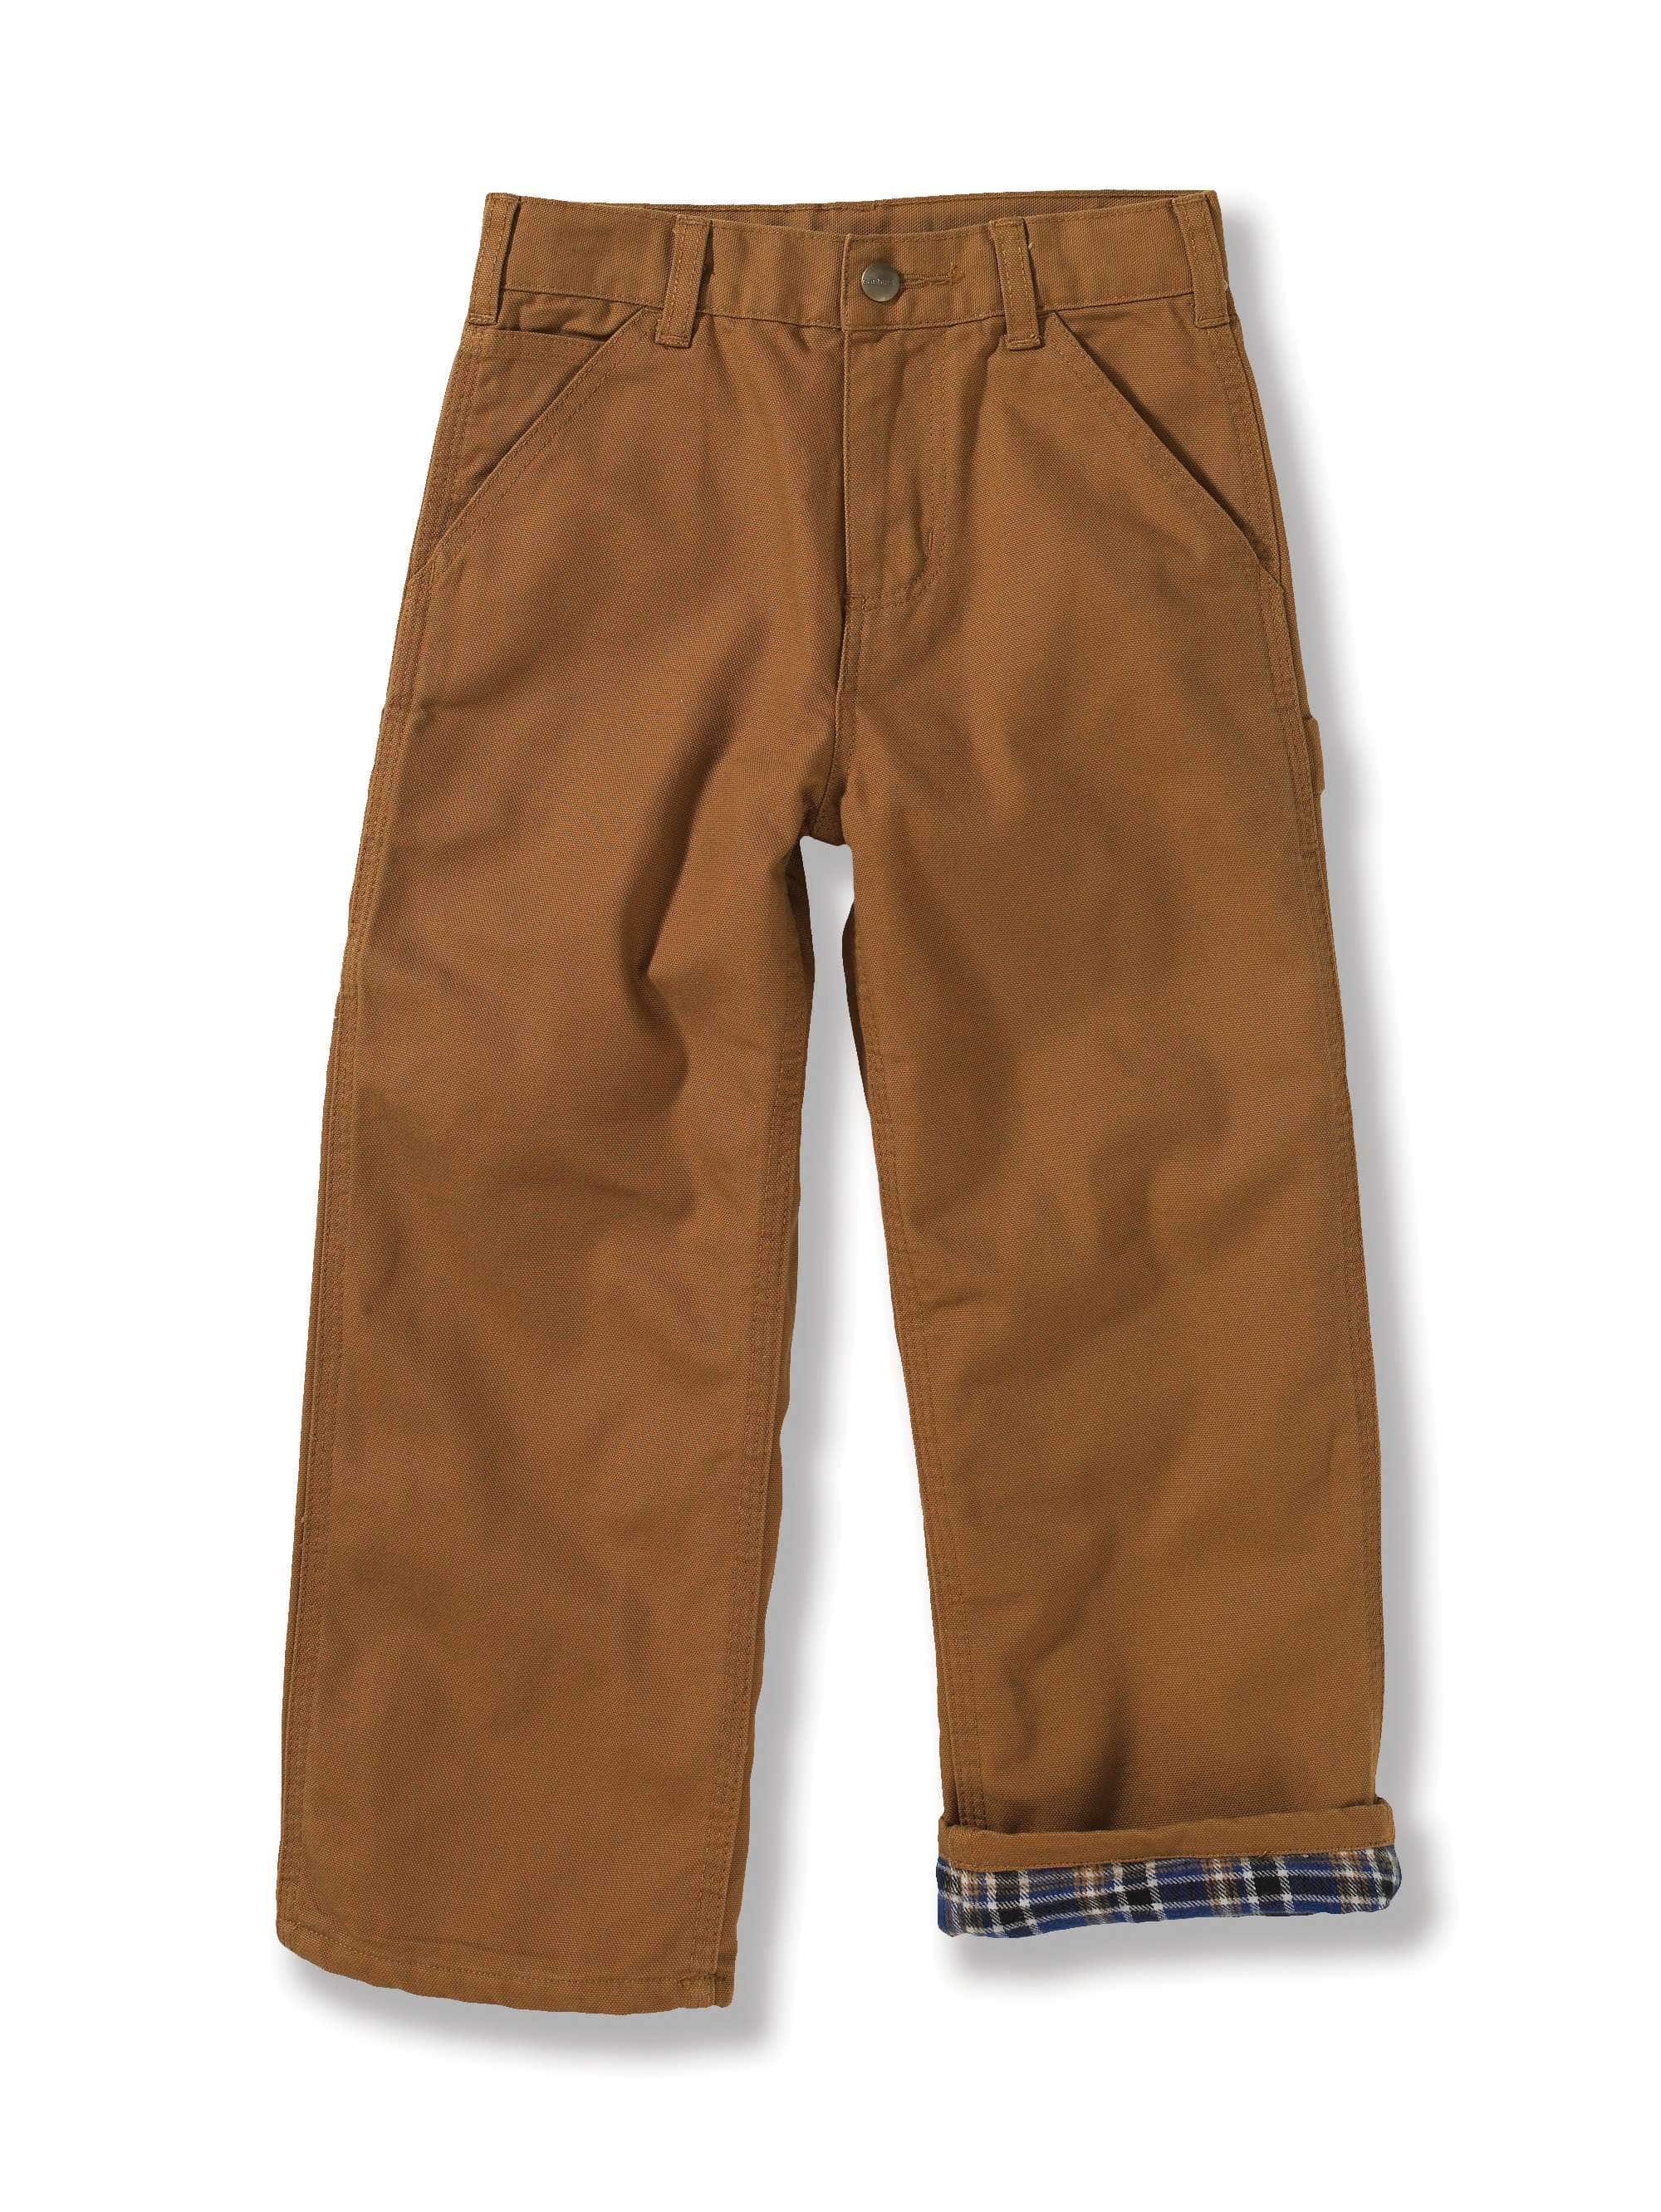 flannel lined warm up pants